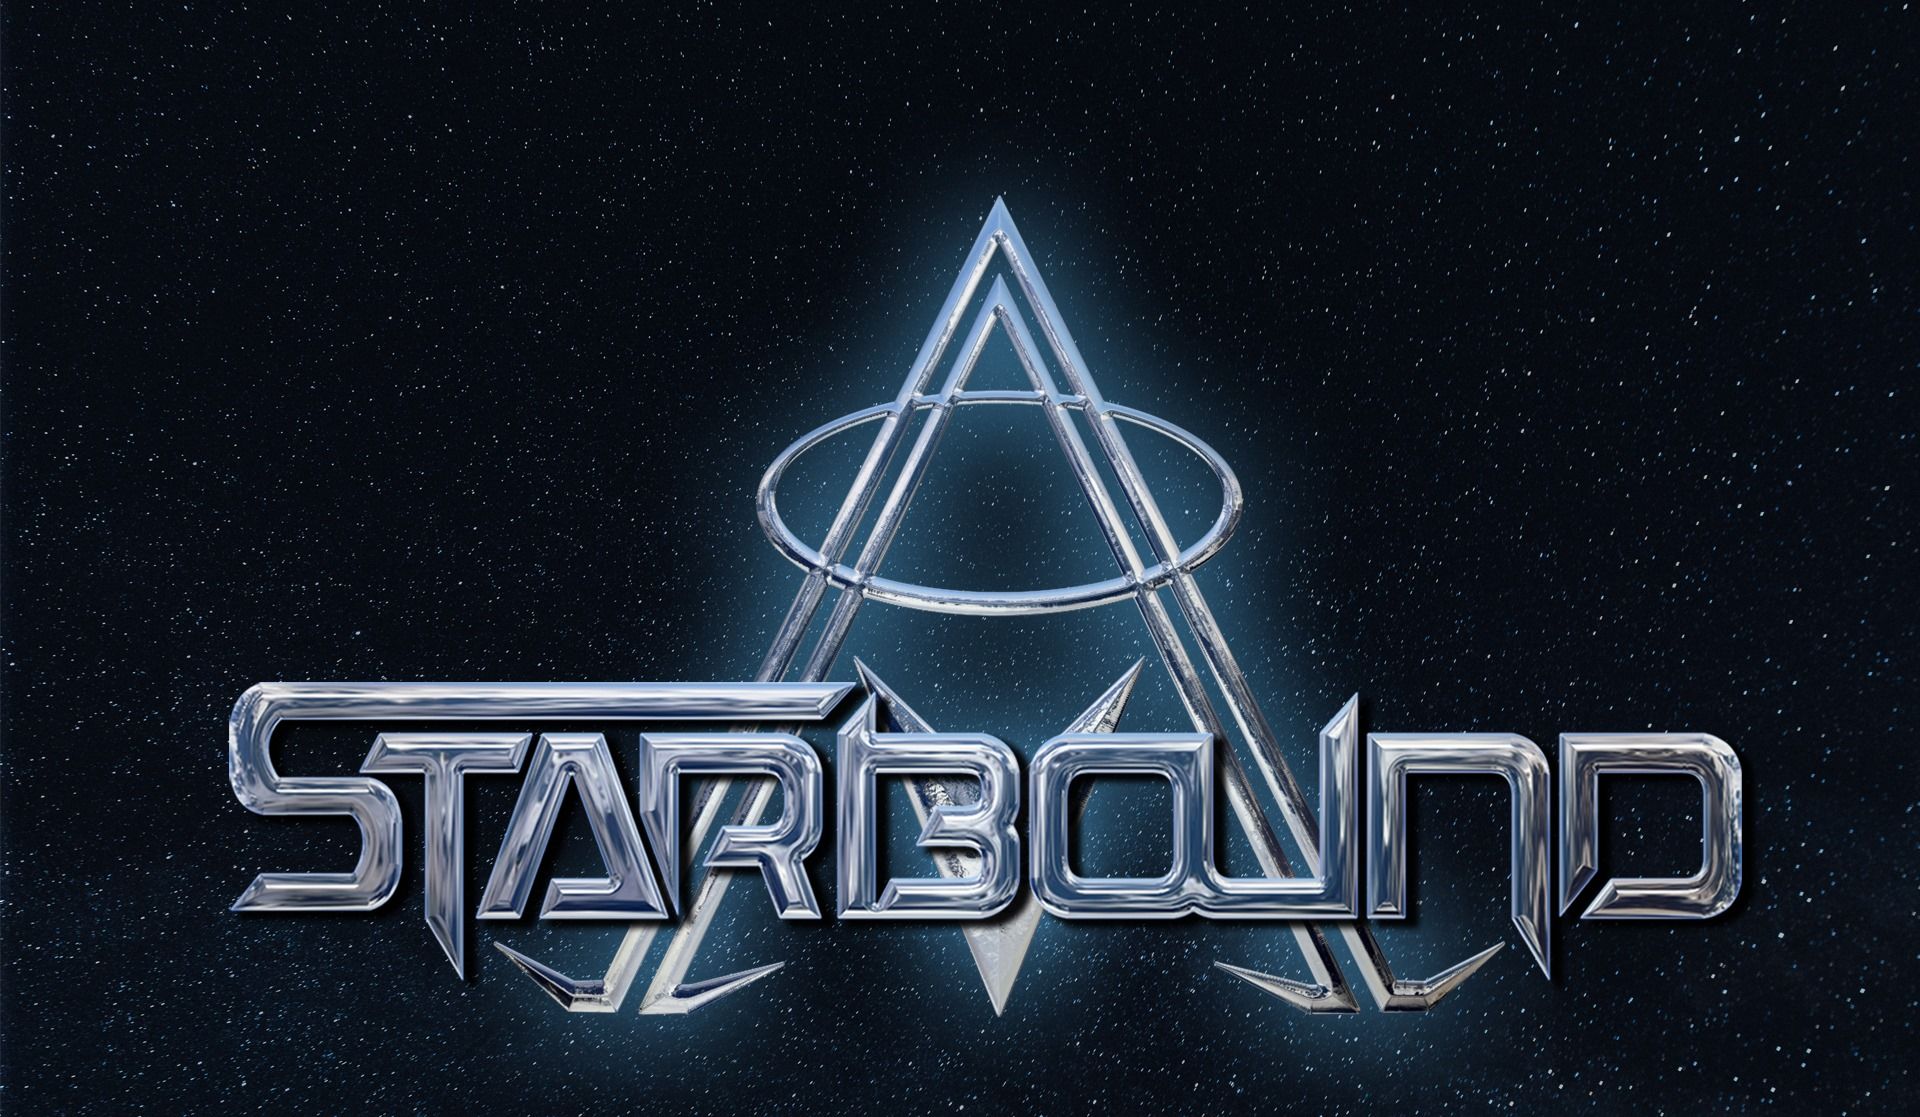 Starbound (Melodic Metal)